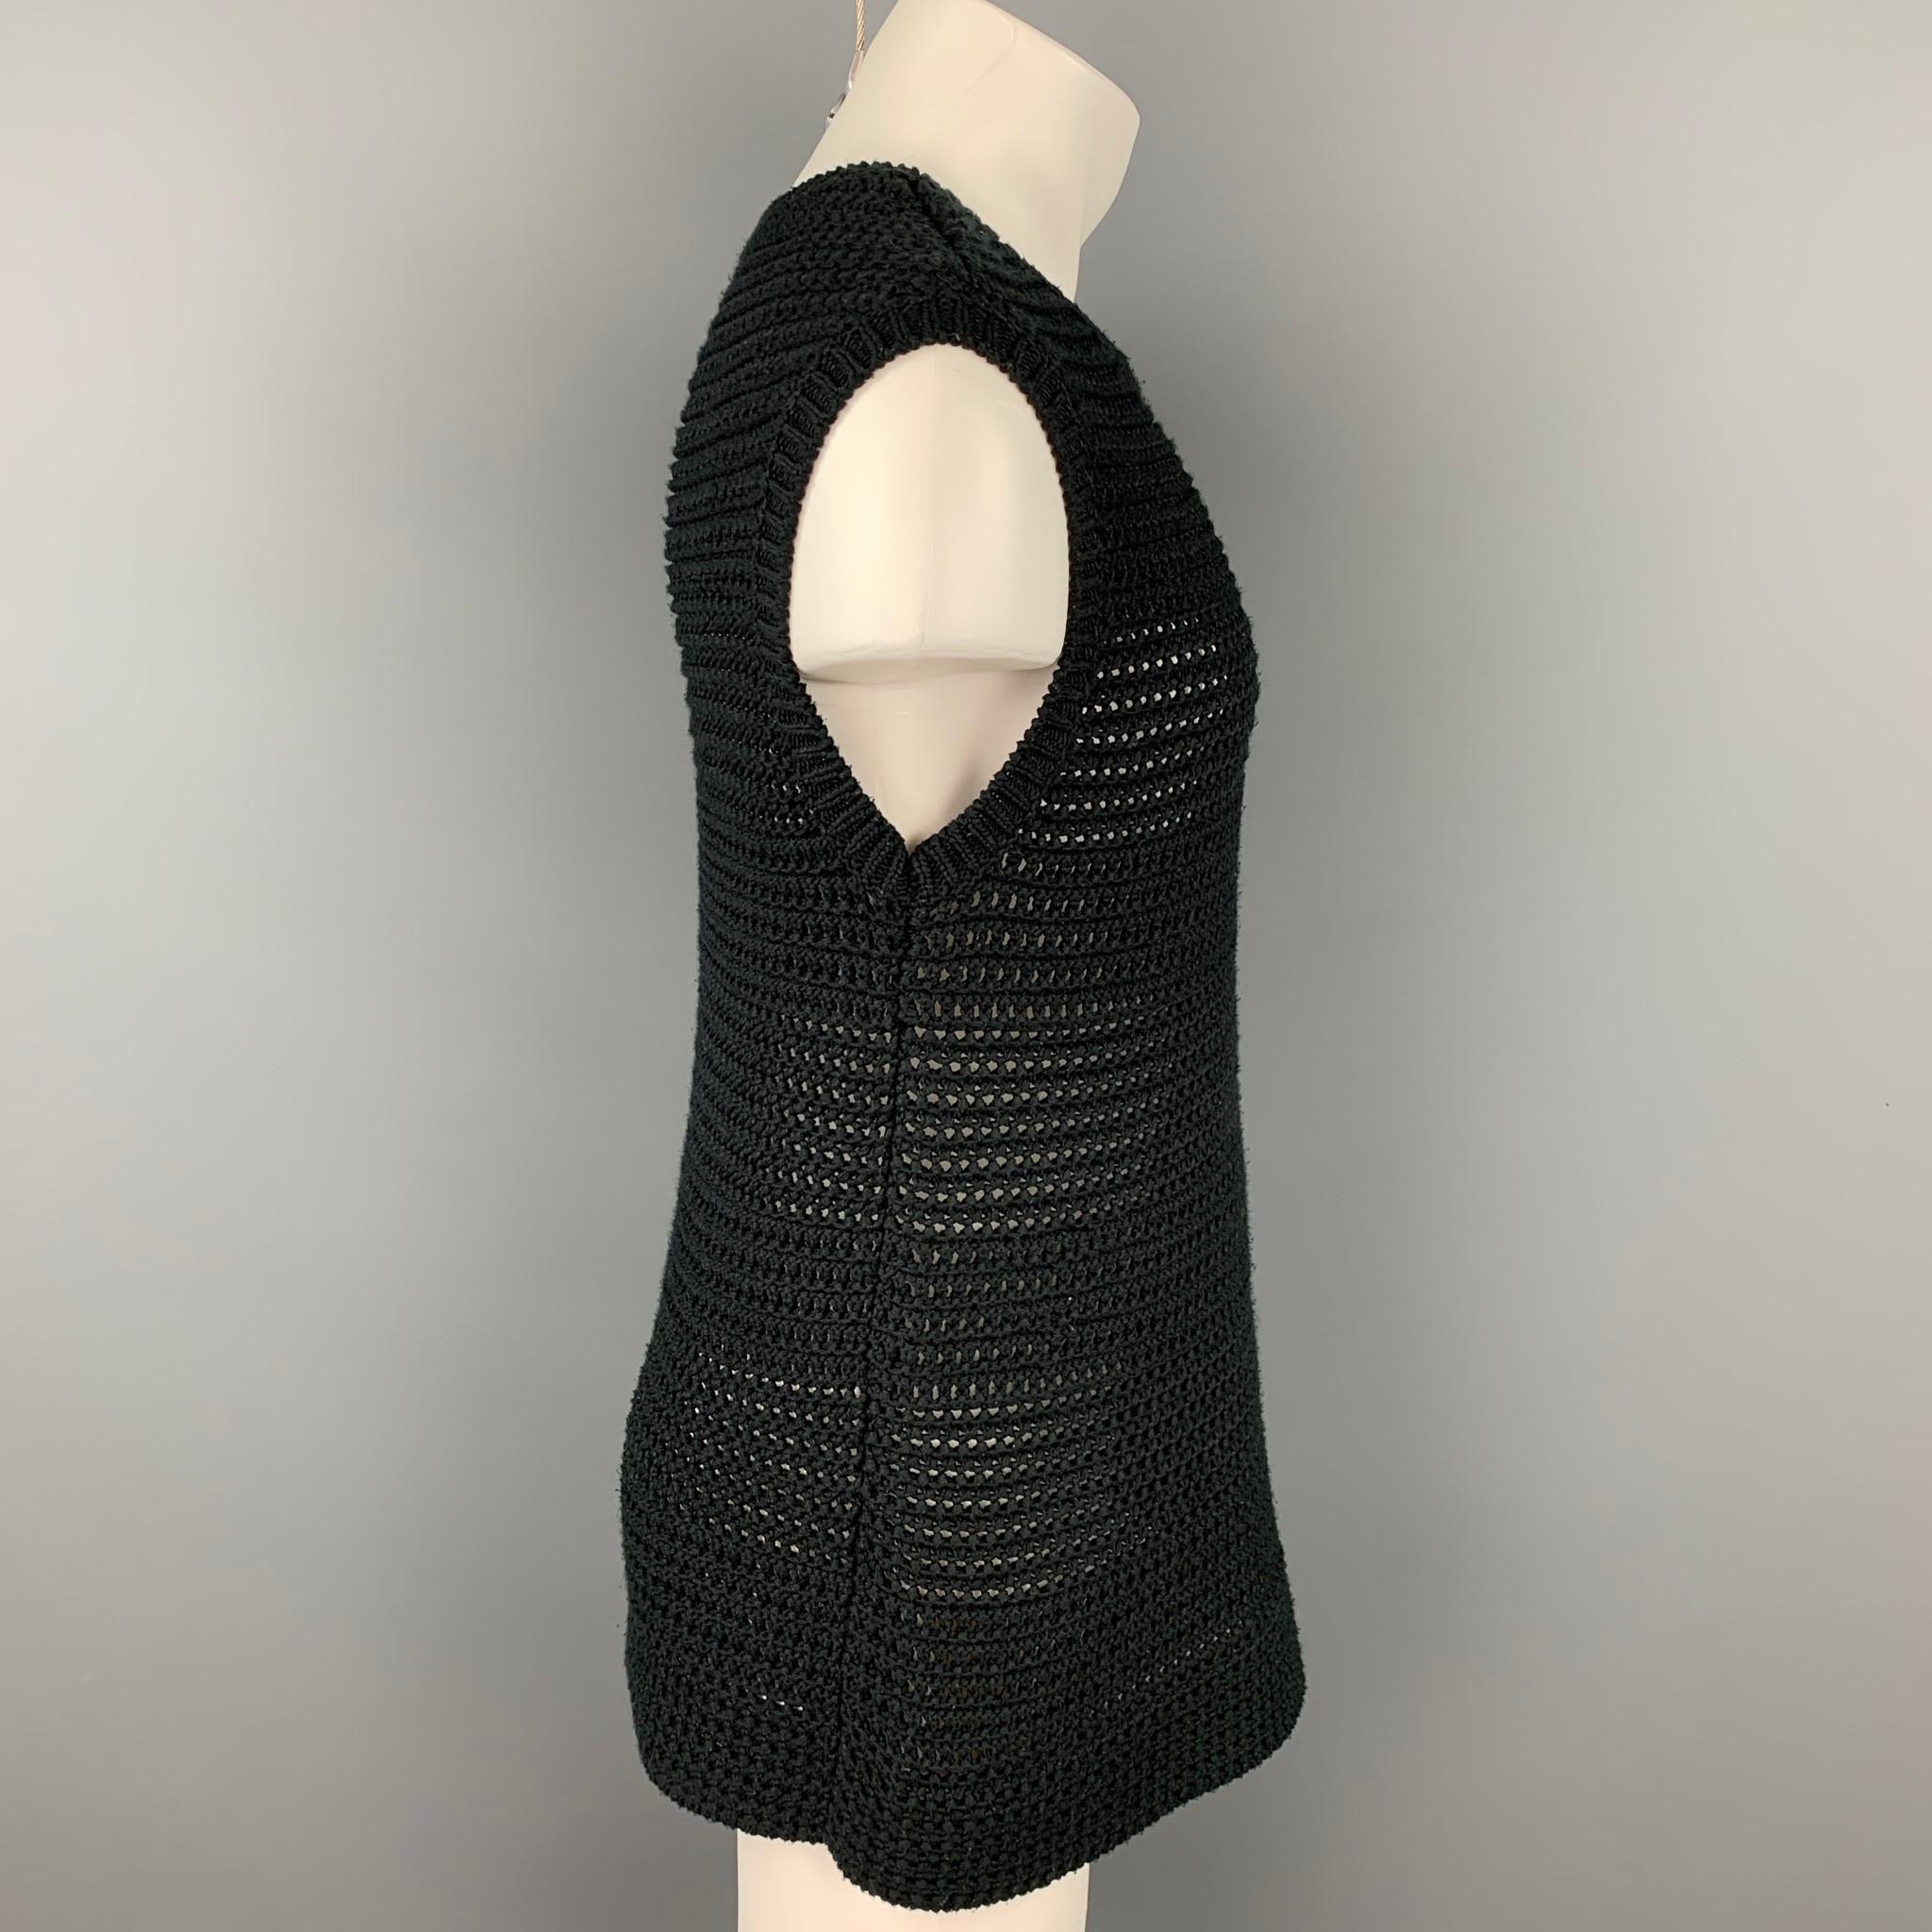 DRIES VAN NOTEN vest comes in a black knitted cotton featuring a crew-neck.

Very Good Pre-Owned Condition.
Marked: S

Measurements:

Shoulder: 19 in.
Chest: 38 in.
Length: 29.5 in. 